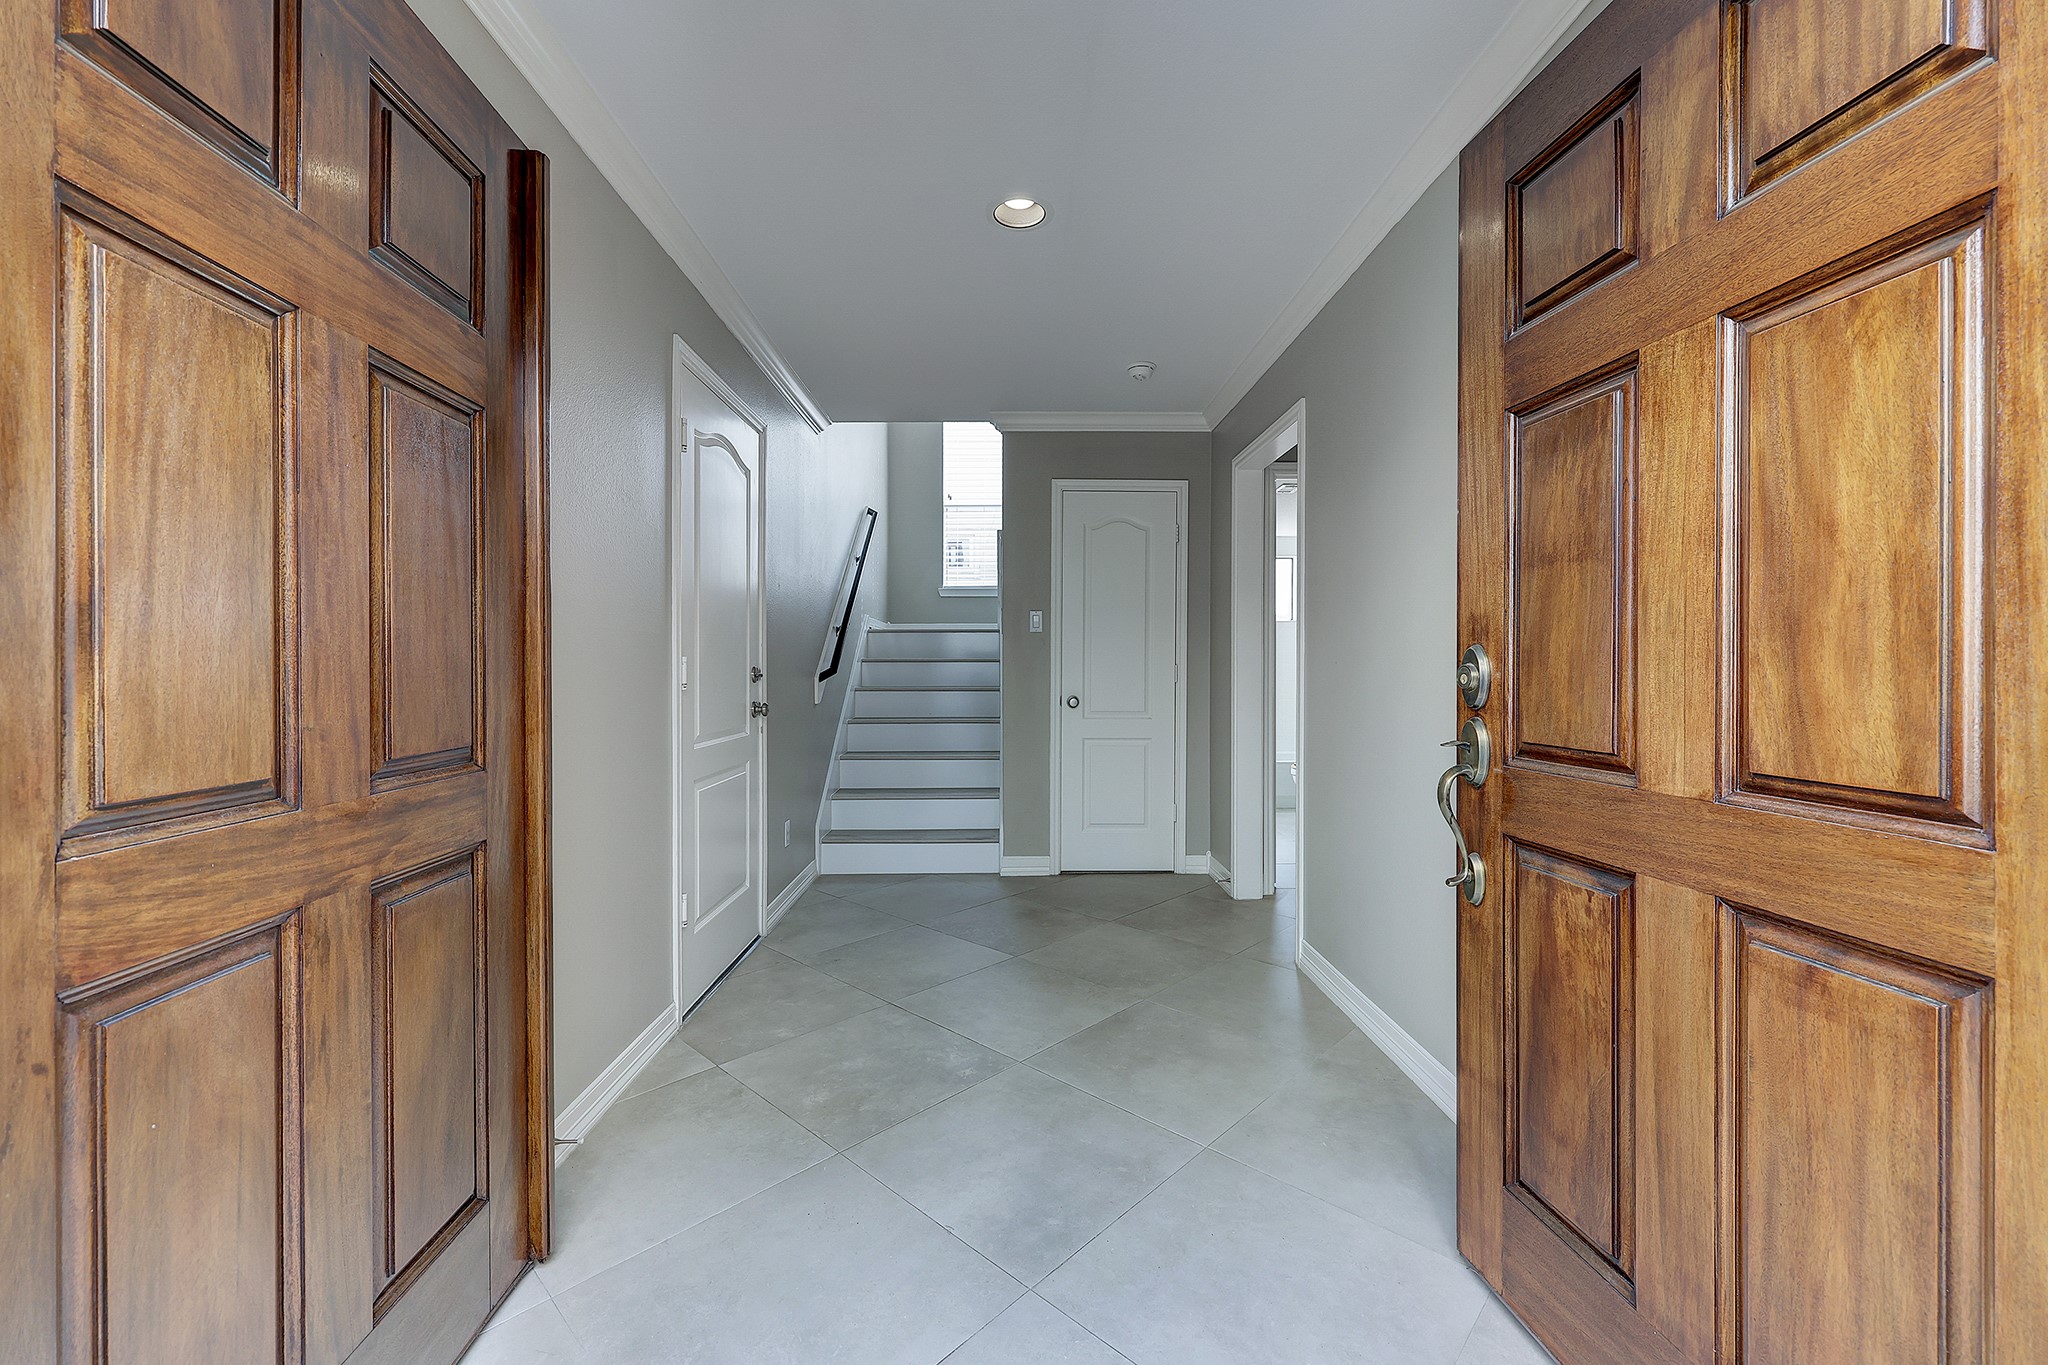 Large versatile foyer merging the front and garage entryways. Offers the ideal canvas for customization